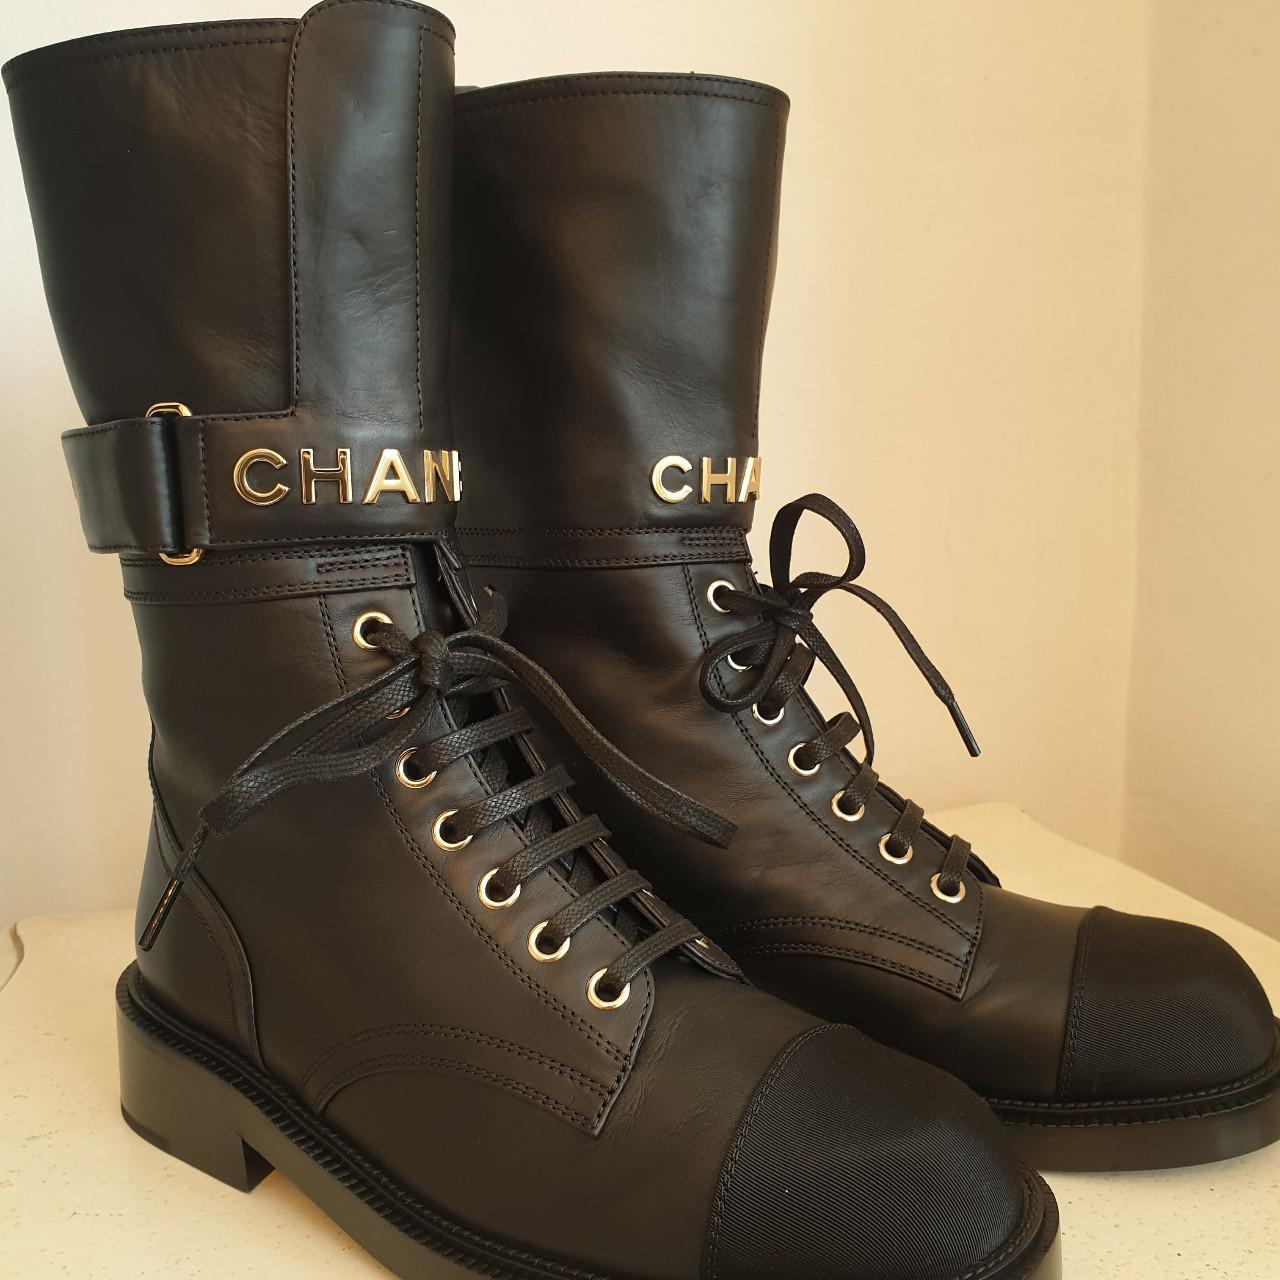 Chanel black lace up boots. Brand new with box